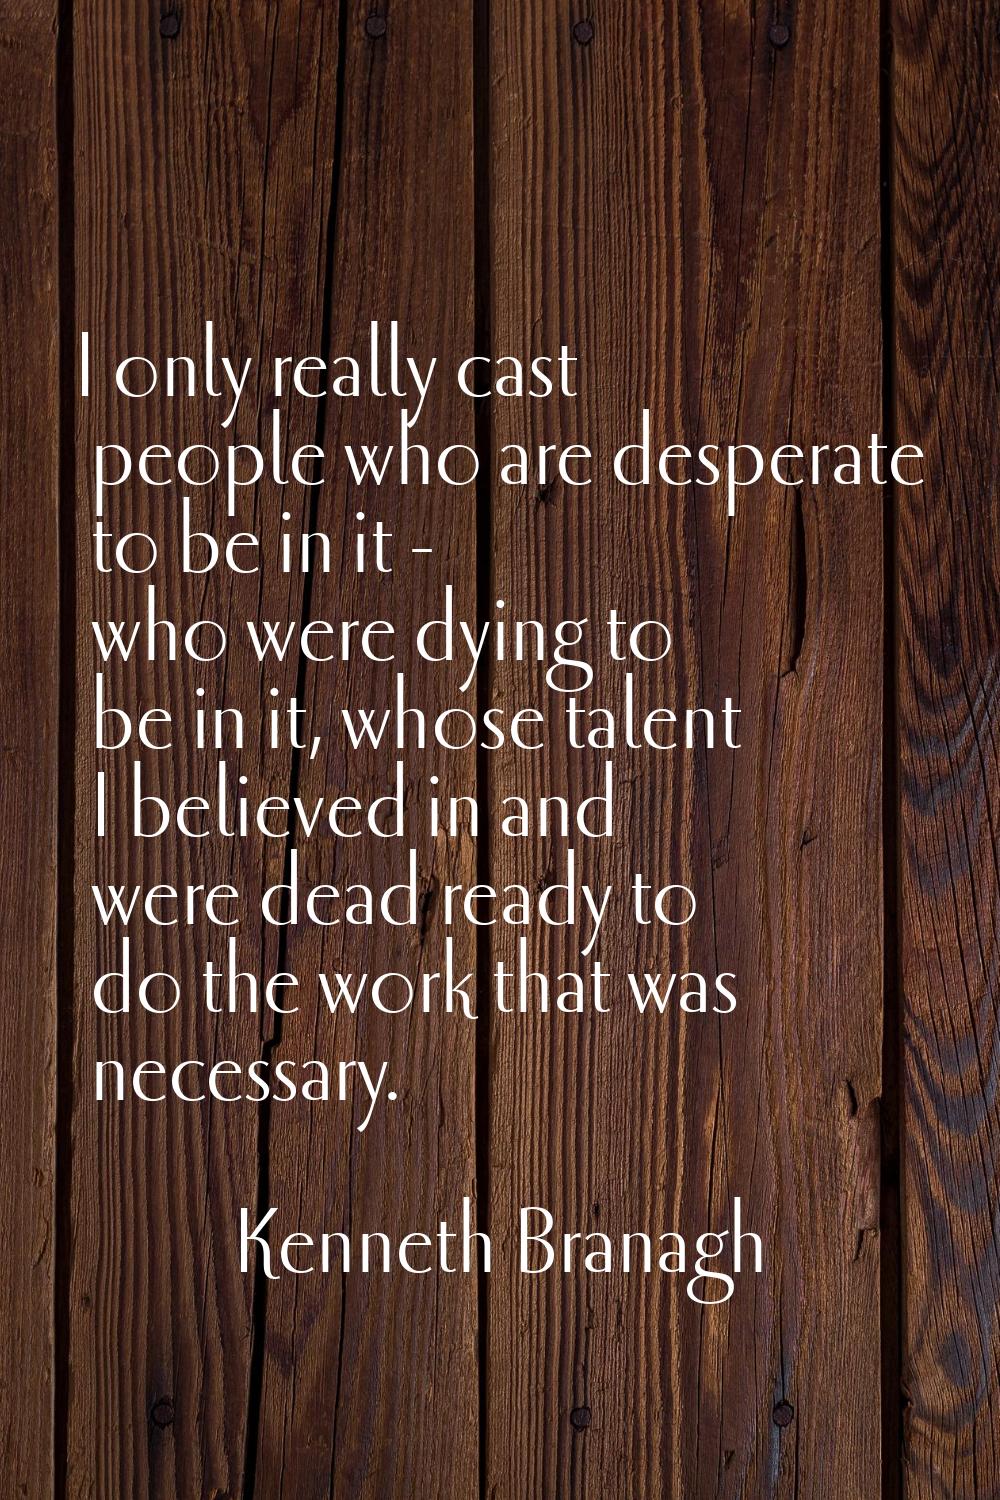 I only really cast people who are desperate to be in it - who were dying to be in it, whose talent 